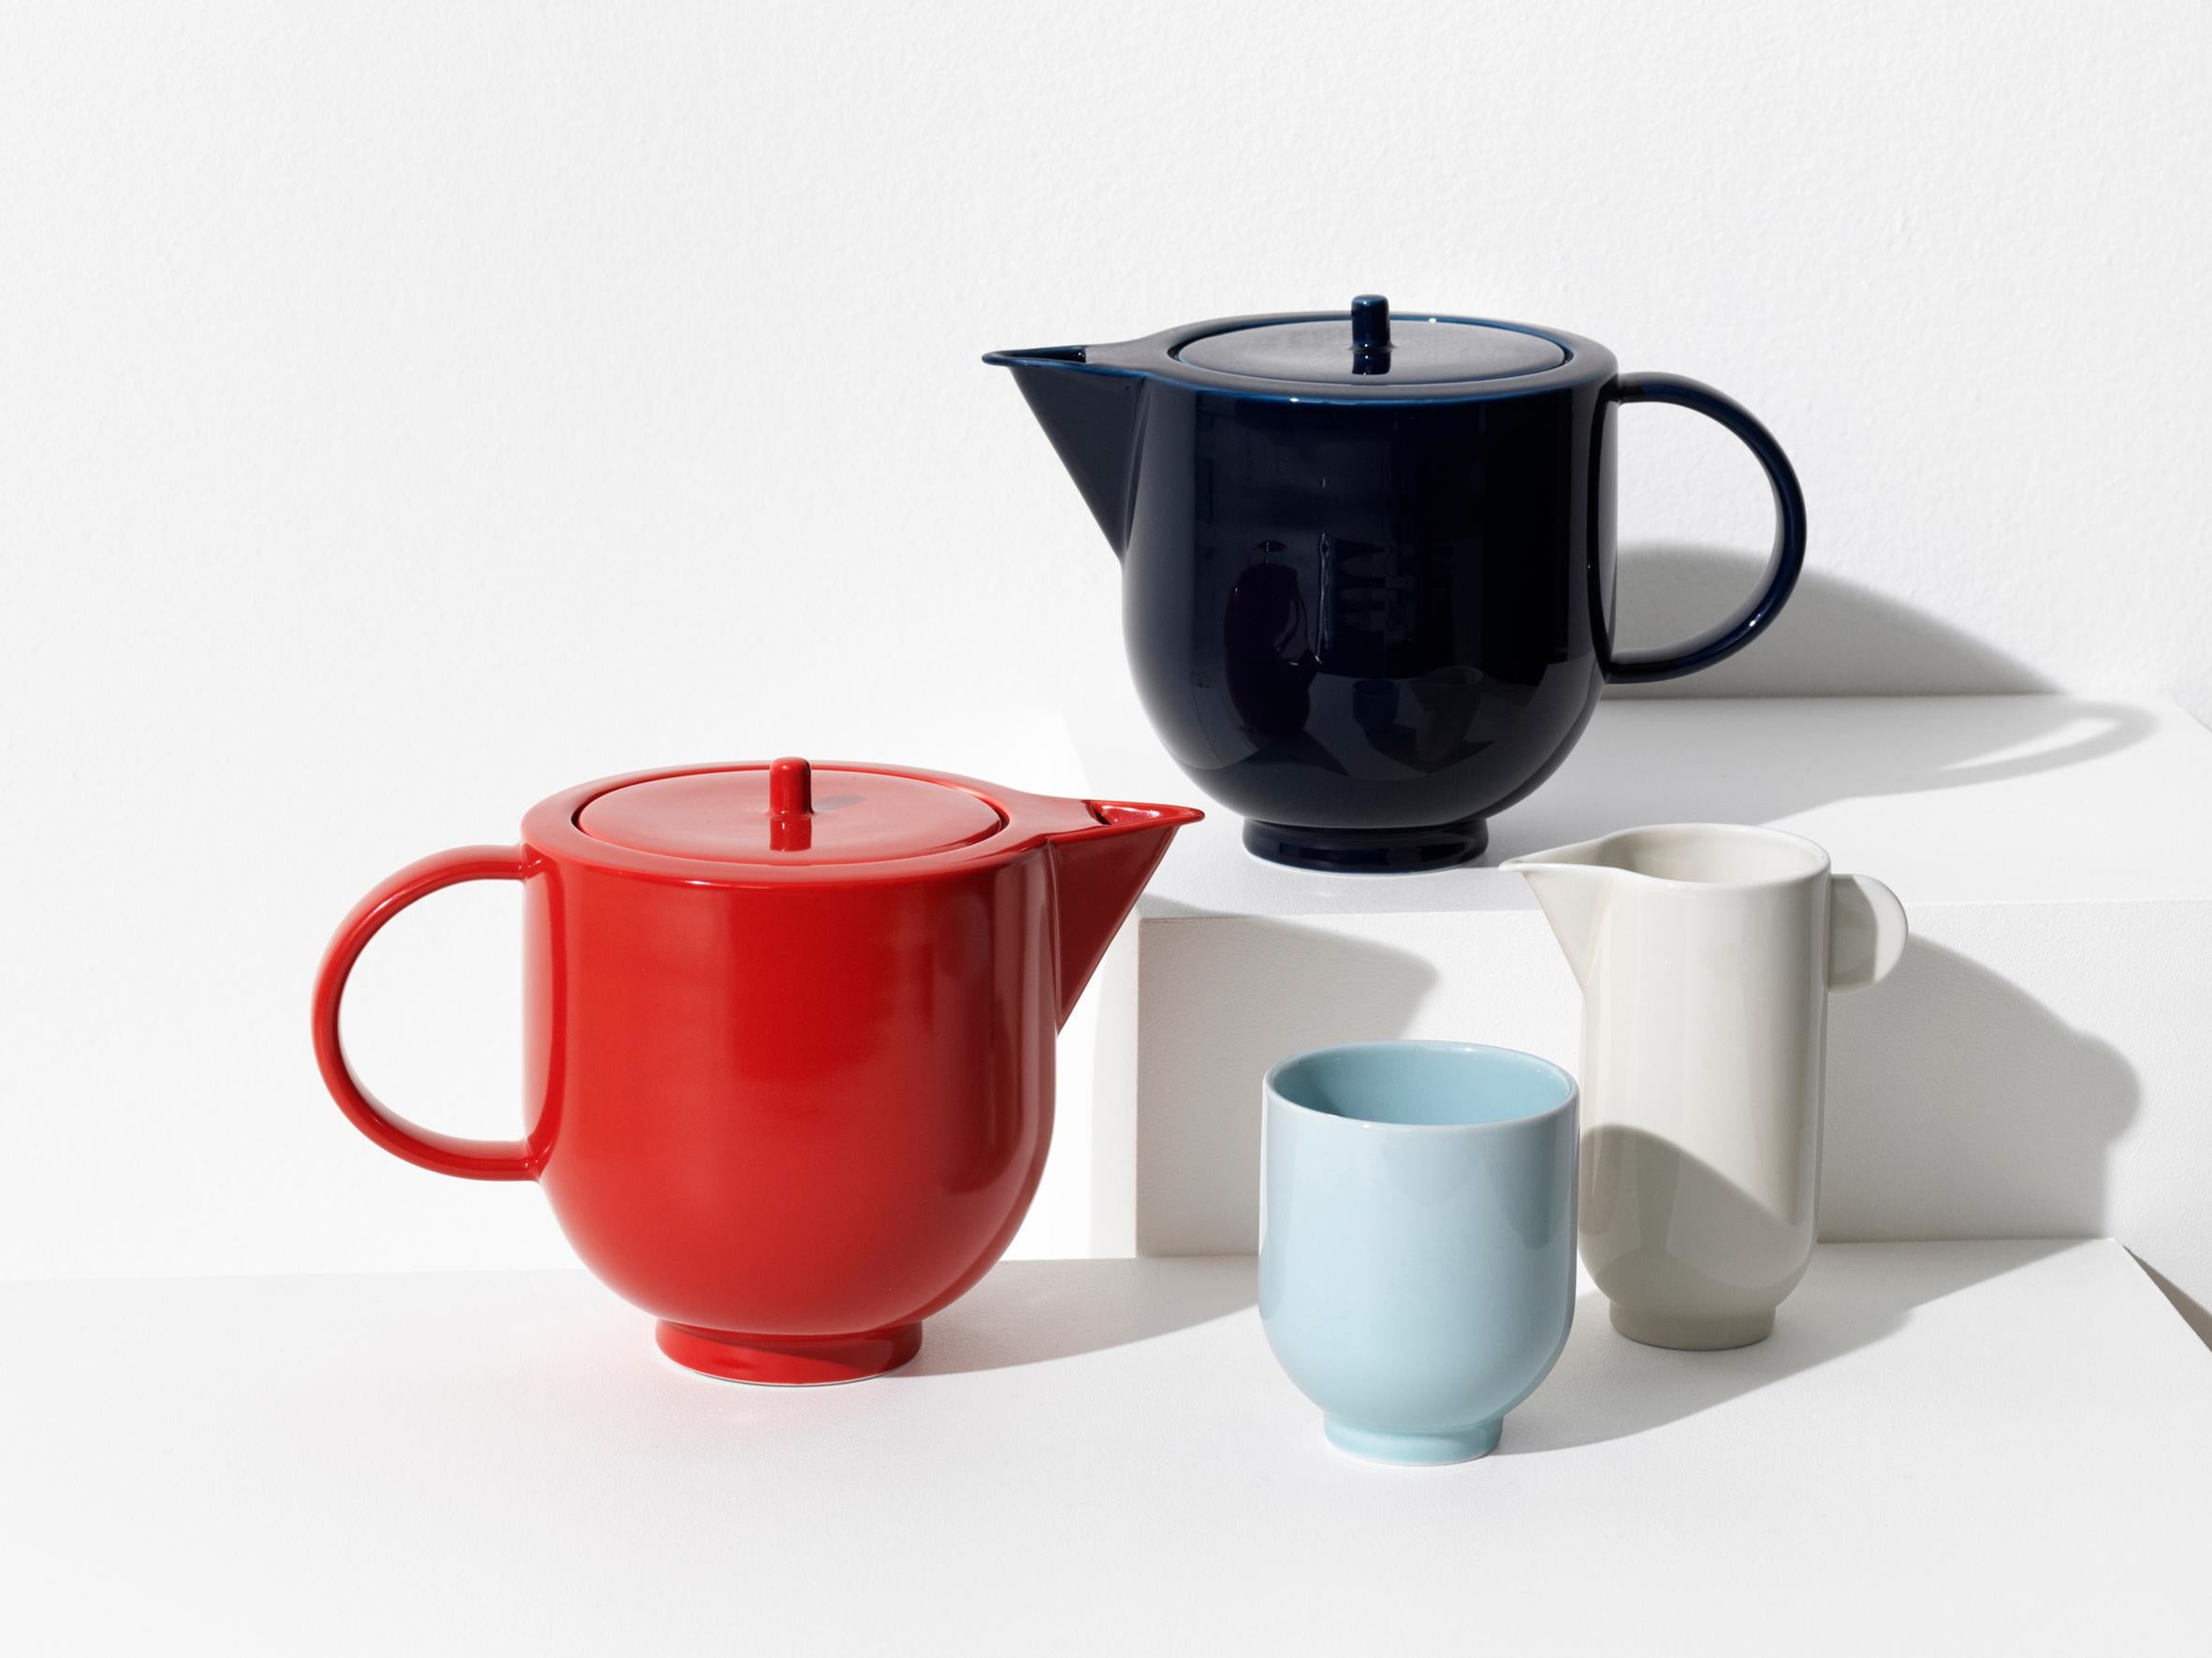 The YOKO pitcher is a significant and distinctive piece of tableware. Its simple, sculptural shape with strong, sharp edges challenges the soft material of porcelain.

The pitcher is available in eggshell white and dark navy blue. It contains